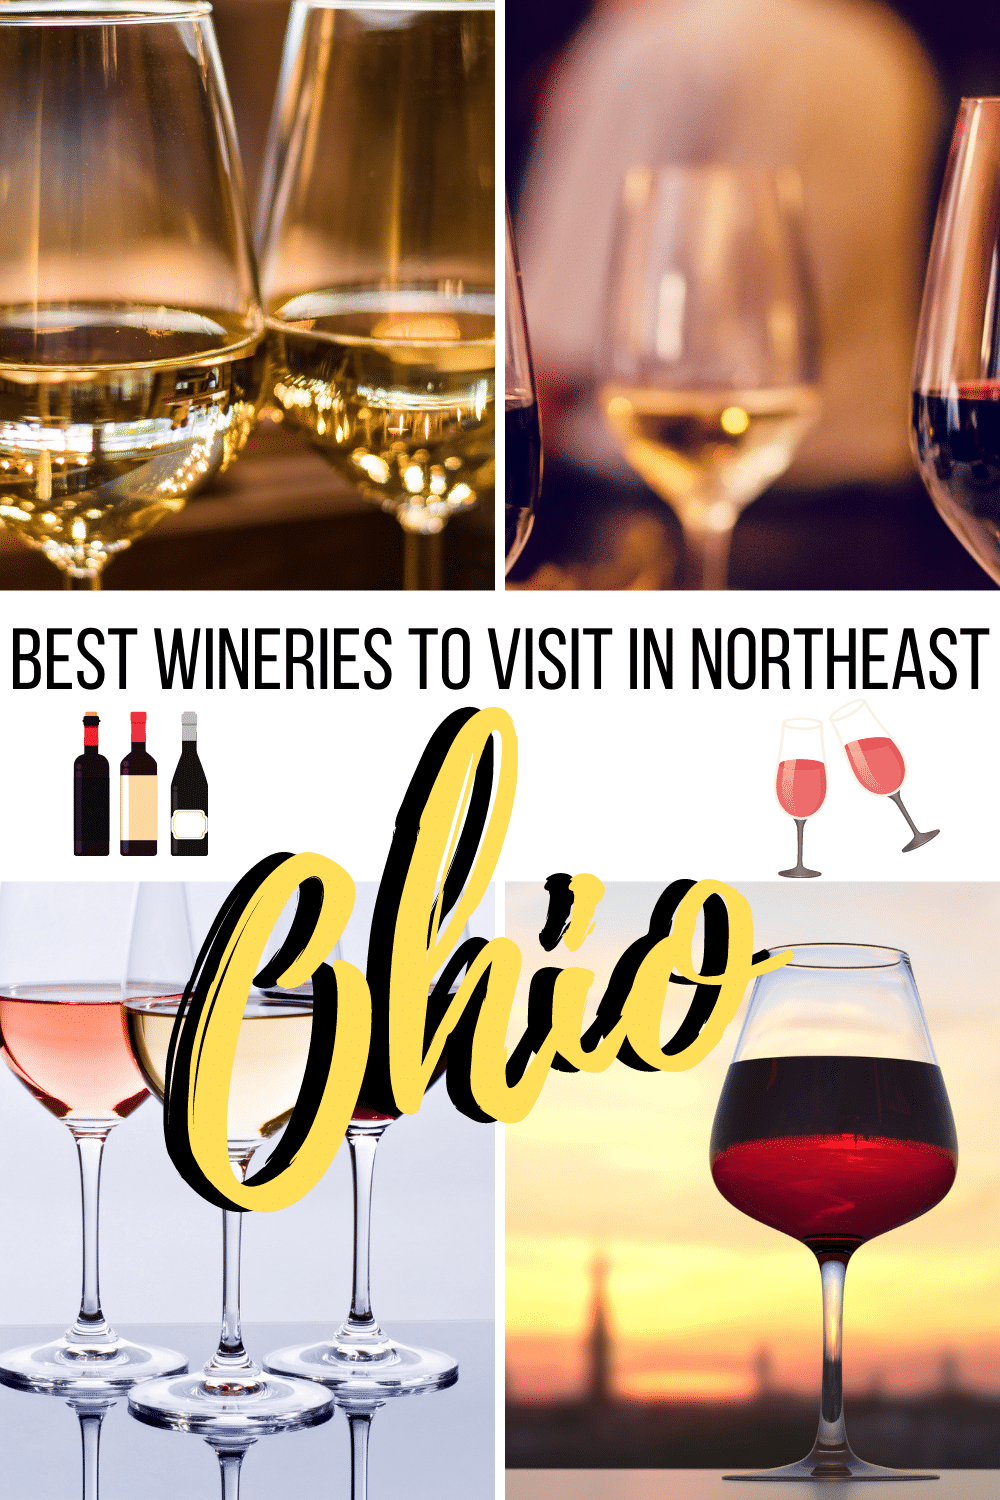 Wineries in Northeast Ohio are considered hidden gems. Wineries in Northeast Ohio produce ice wine, reds, whites and sweet fruit wines. #ohio #ohiowines #ohiowinery #northweastohio #icewine #redwine #whitewine